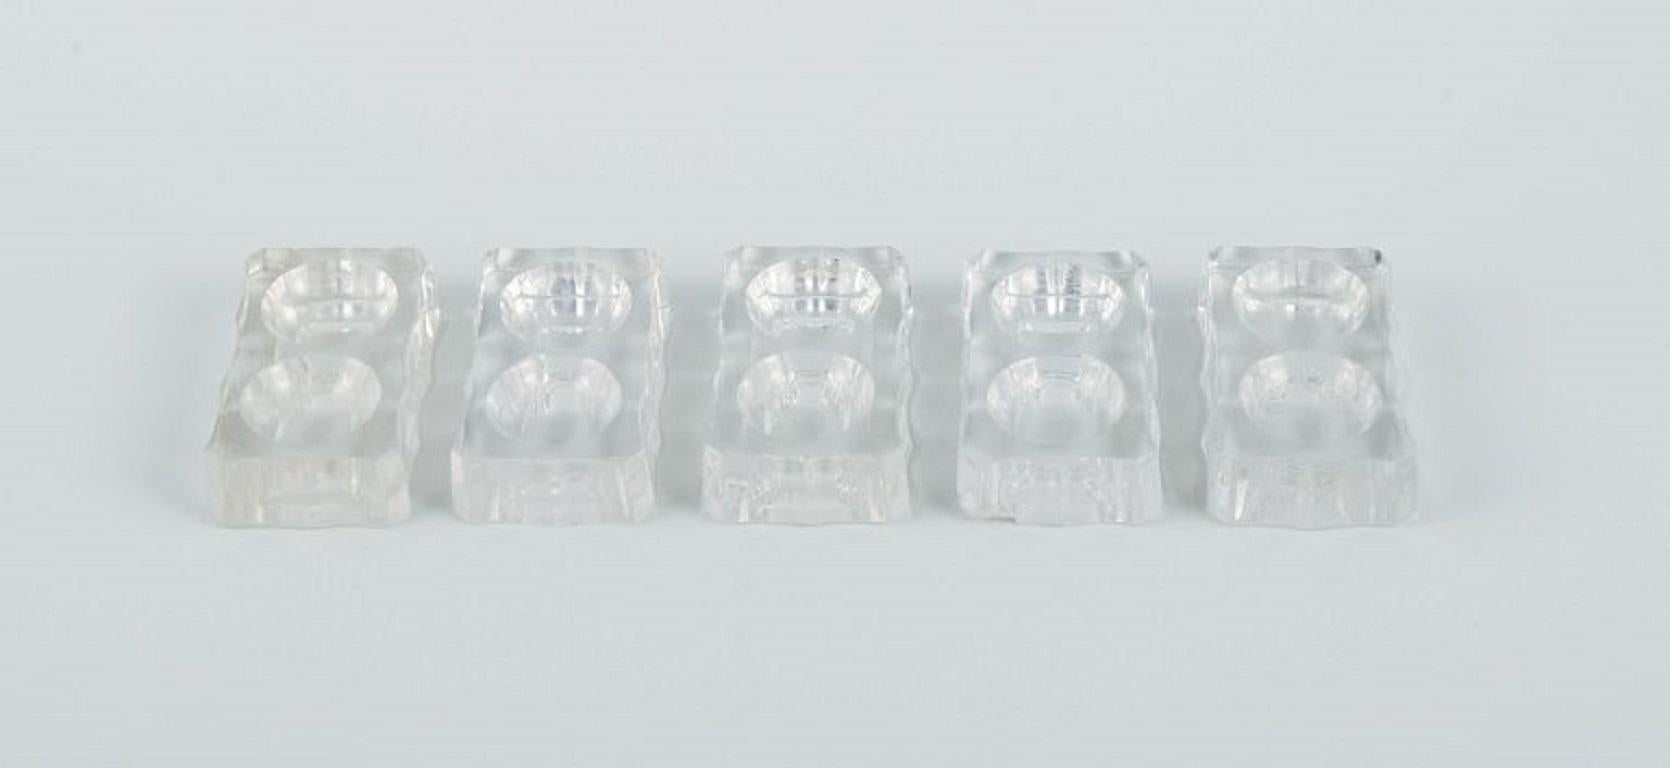 Baccarat, France. Five Art Deco double salt cellars, faceted crystal glass.
1930s/40s.
Measures: L 7.5 cm. x W 4.0 cm. x H 1.7 cm.
In good condition with a few minimal and insignificant chips.